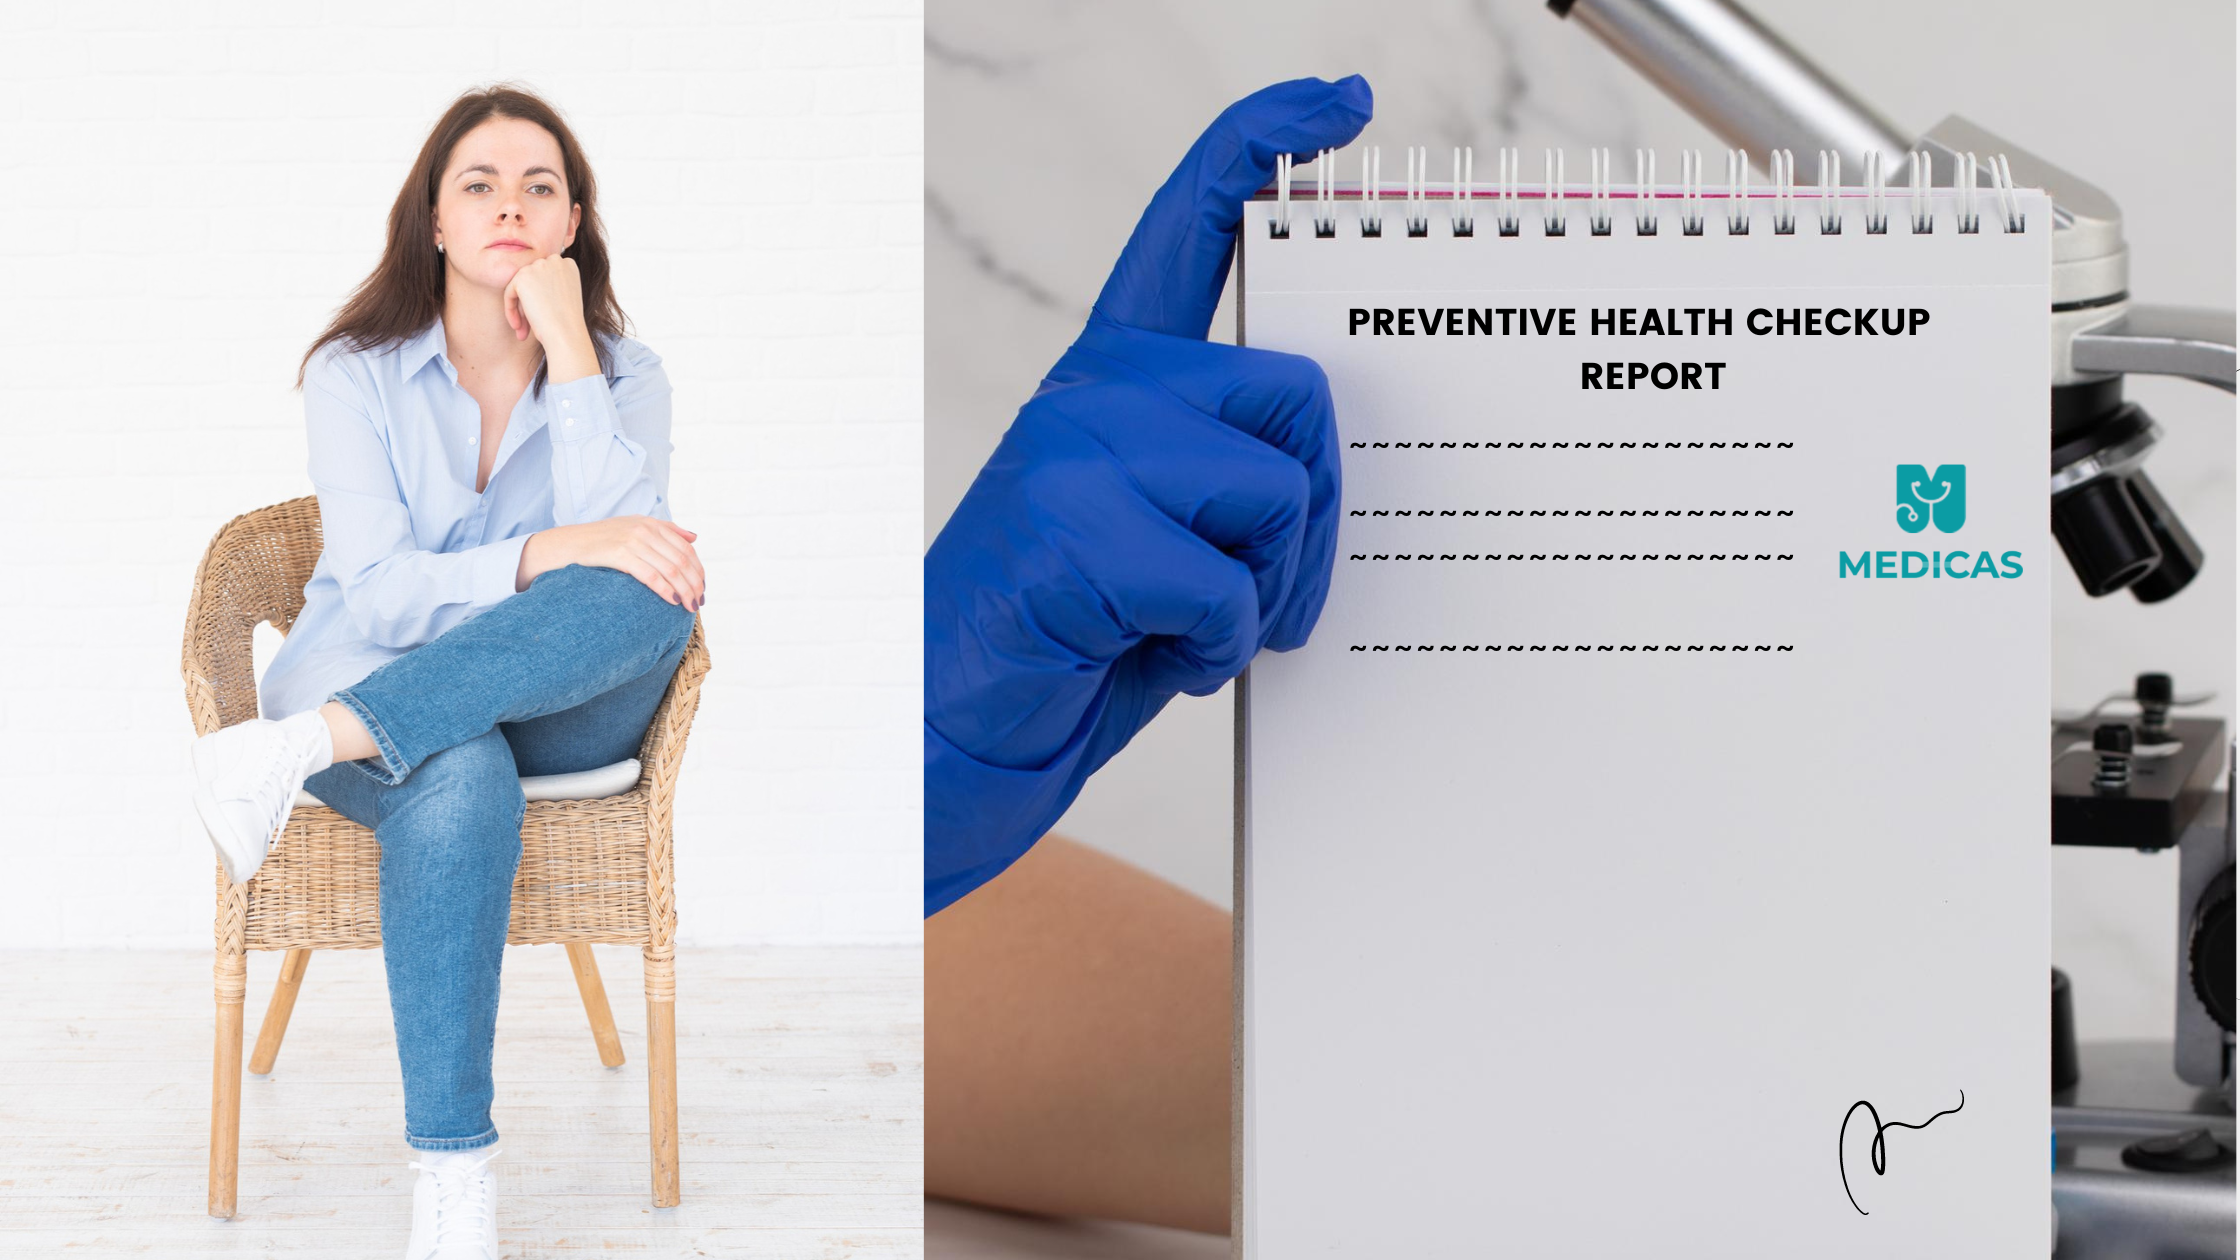 Benefits of Preventive Health check up